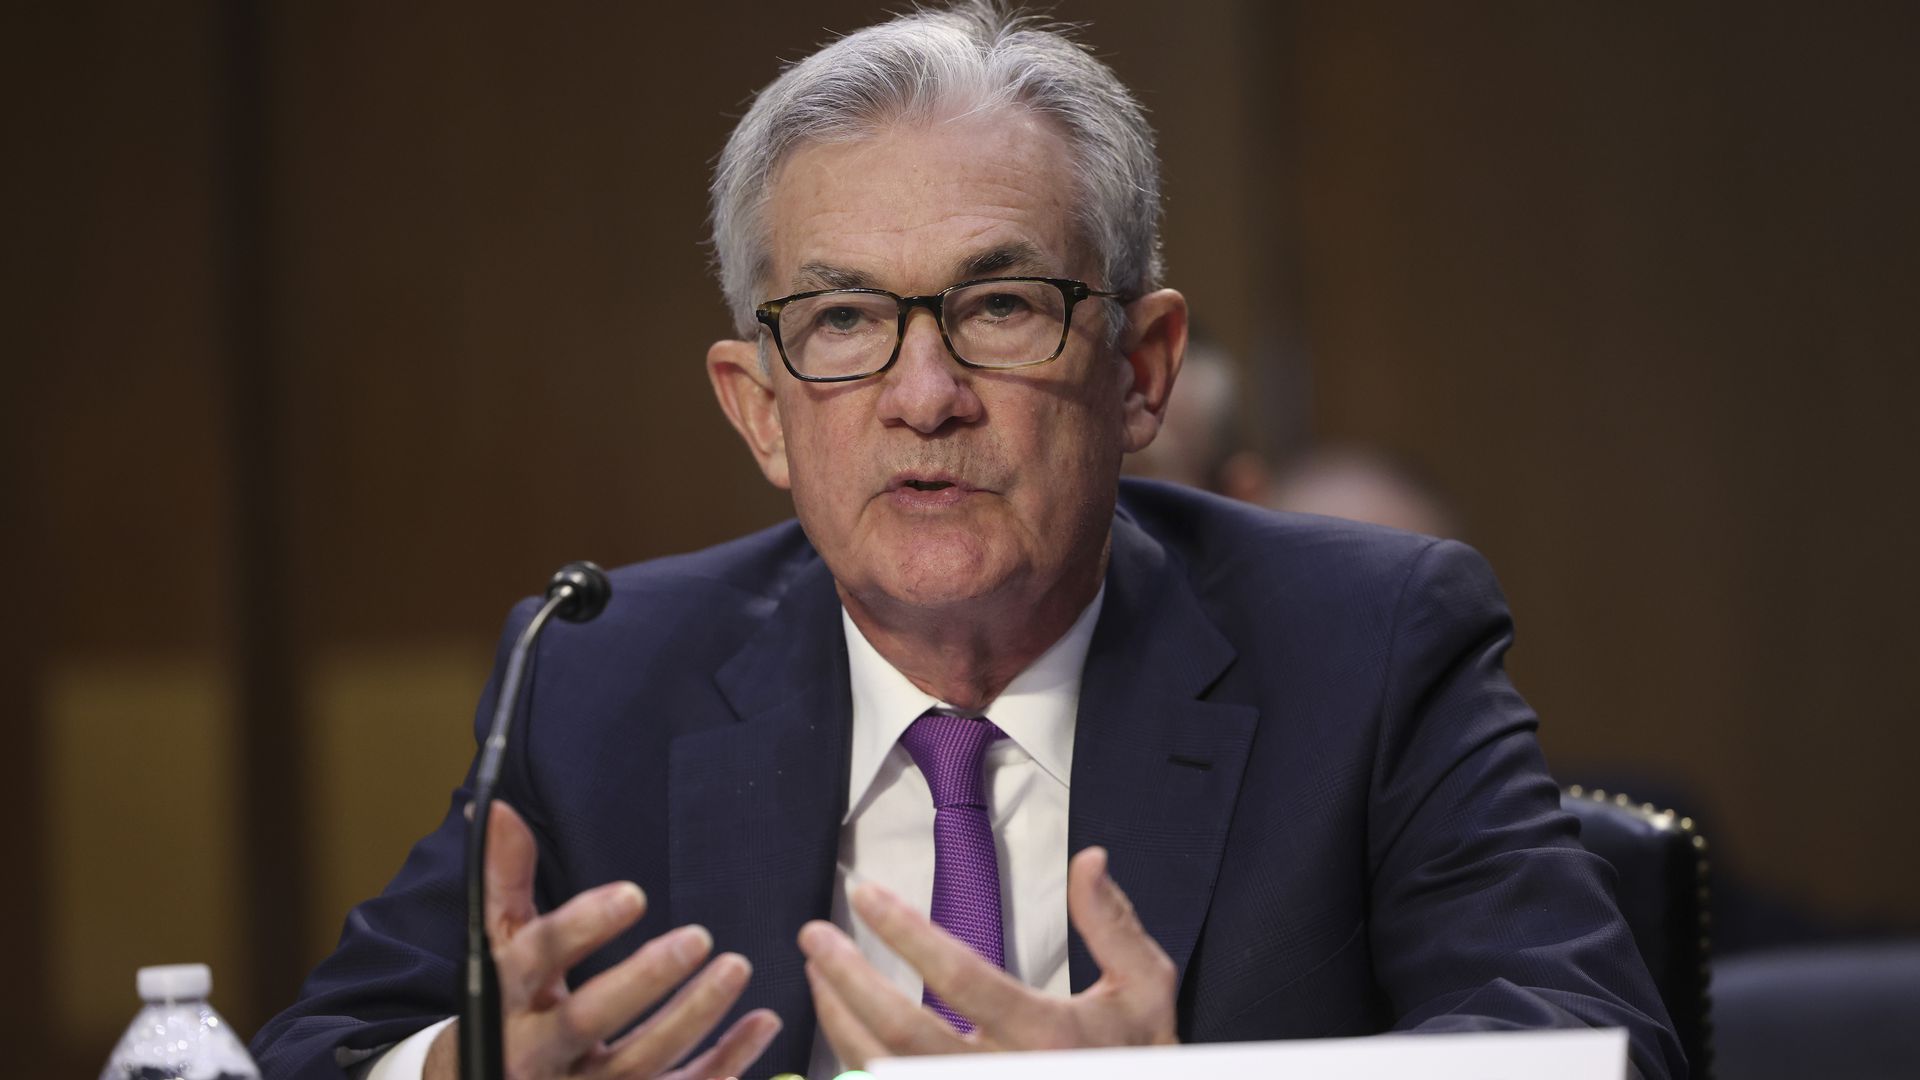 Federal Reserve Chairman Jerome Powell speaking before Congress.